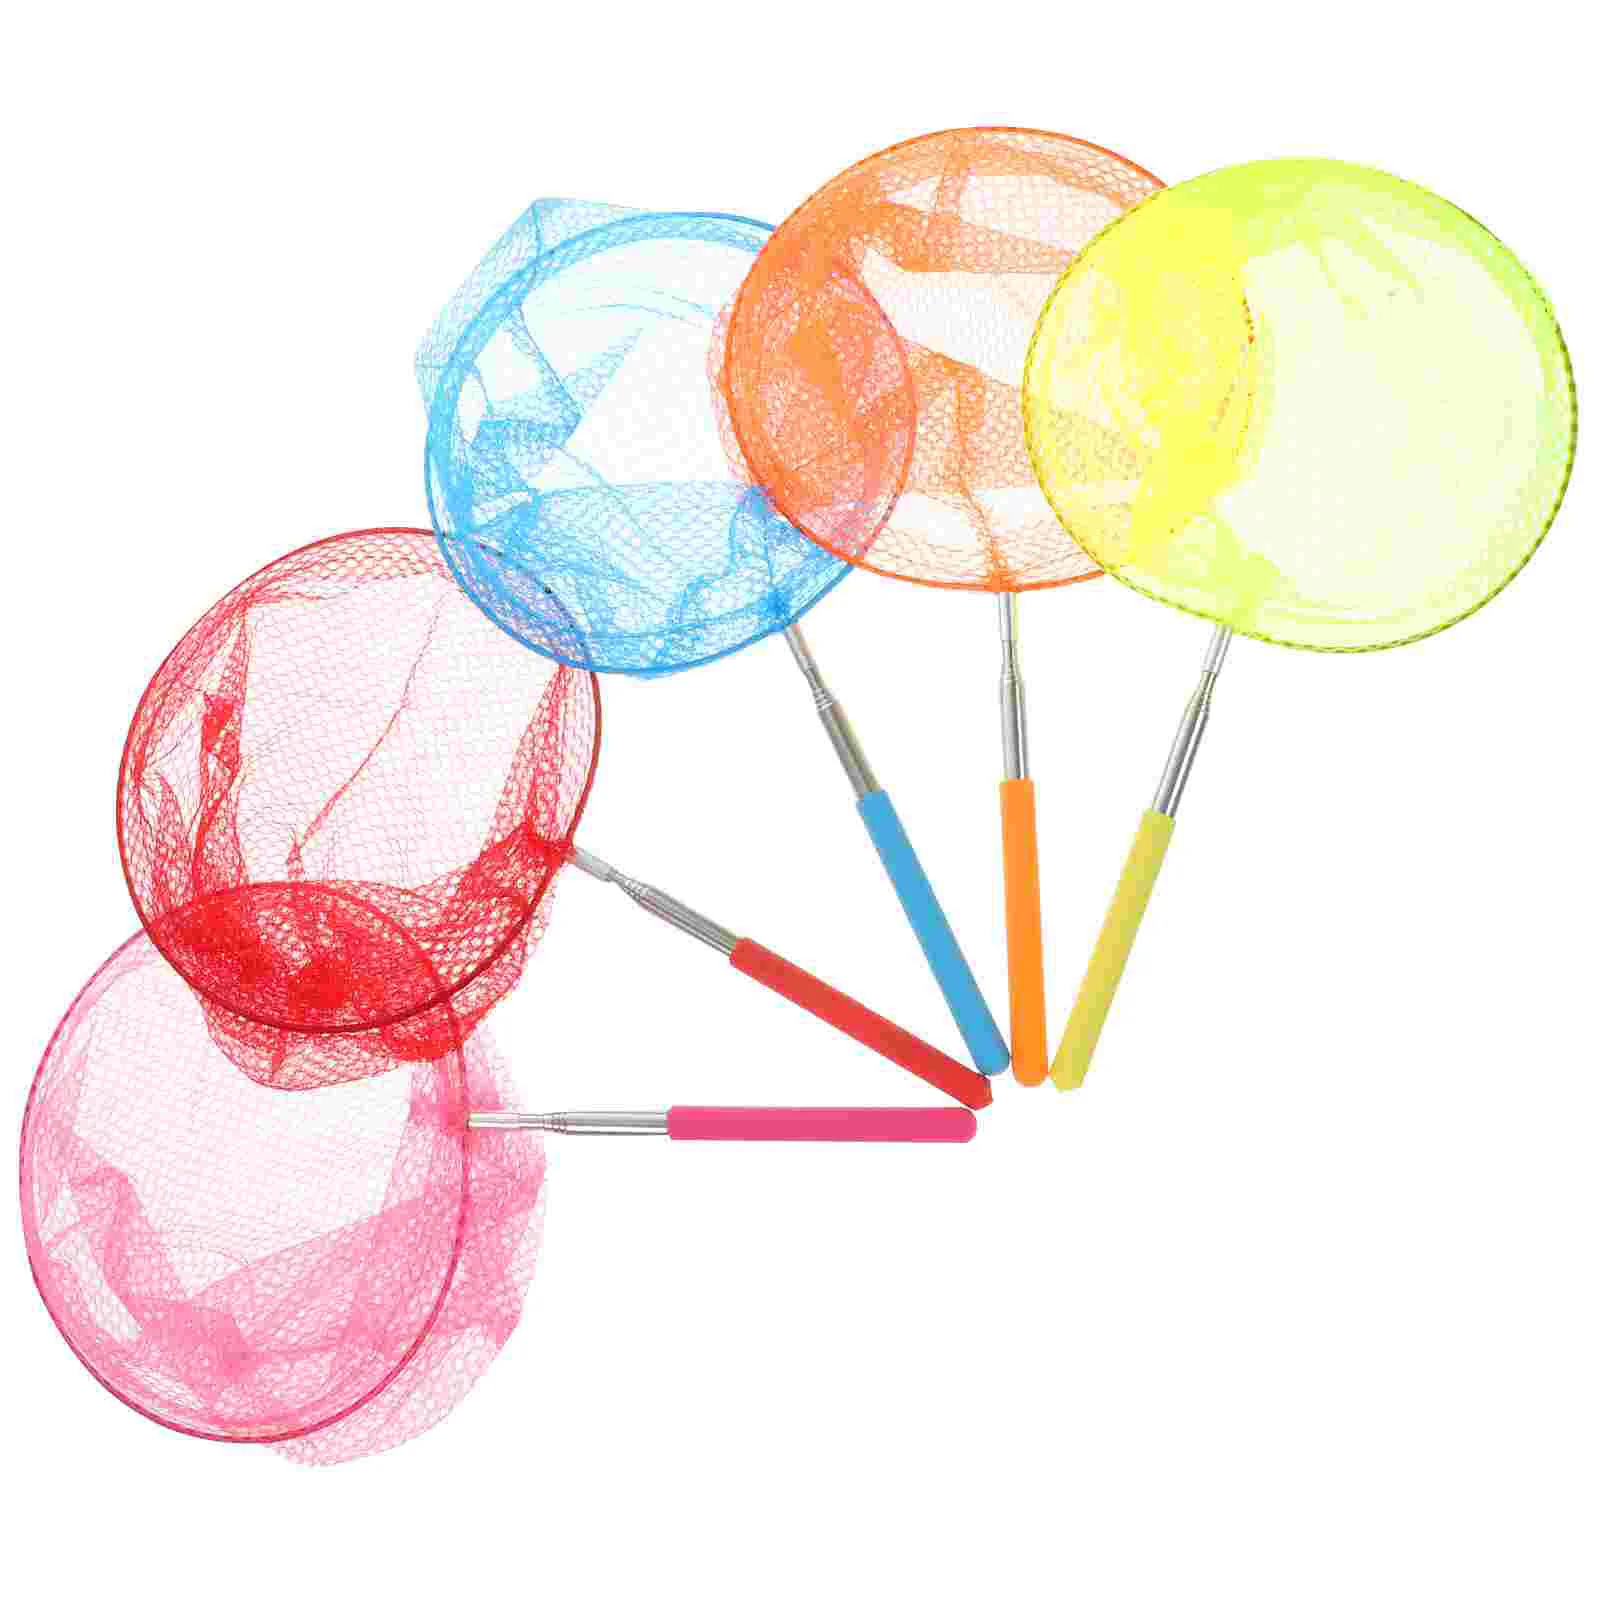 

5 Pcs Telescopic Butterflies Net Insect Catching Small Fishing Toys Stainless Steel Butterfly Nylon Nets Child Kids Sports